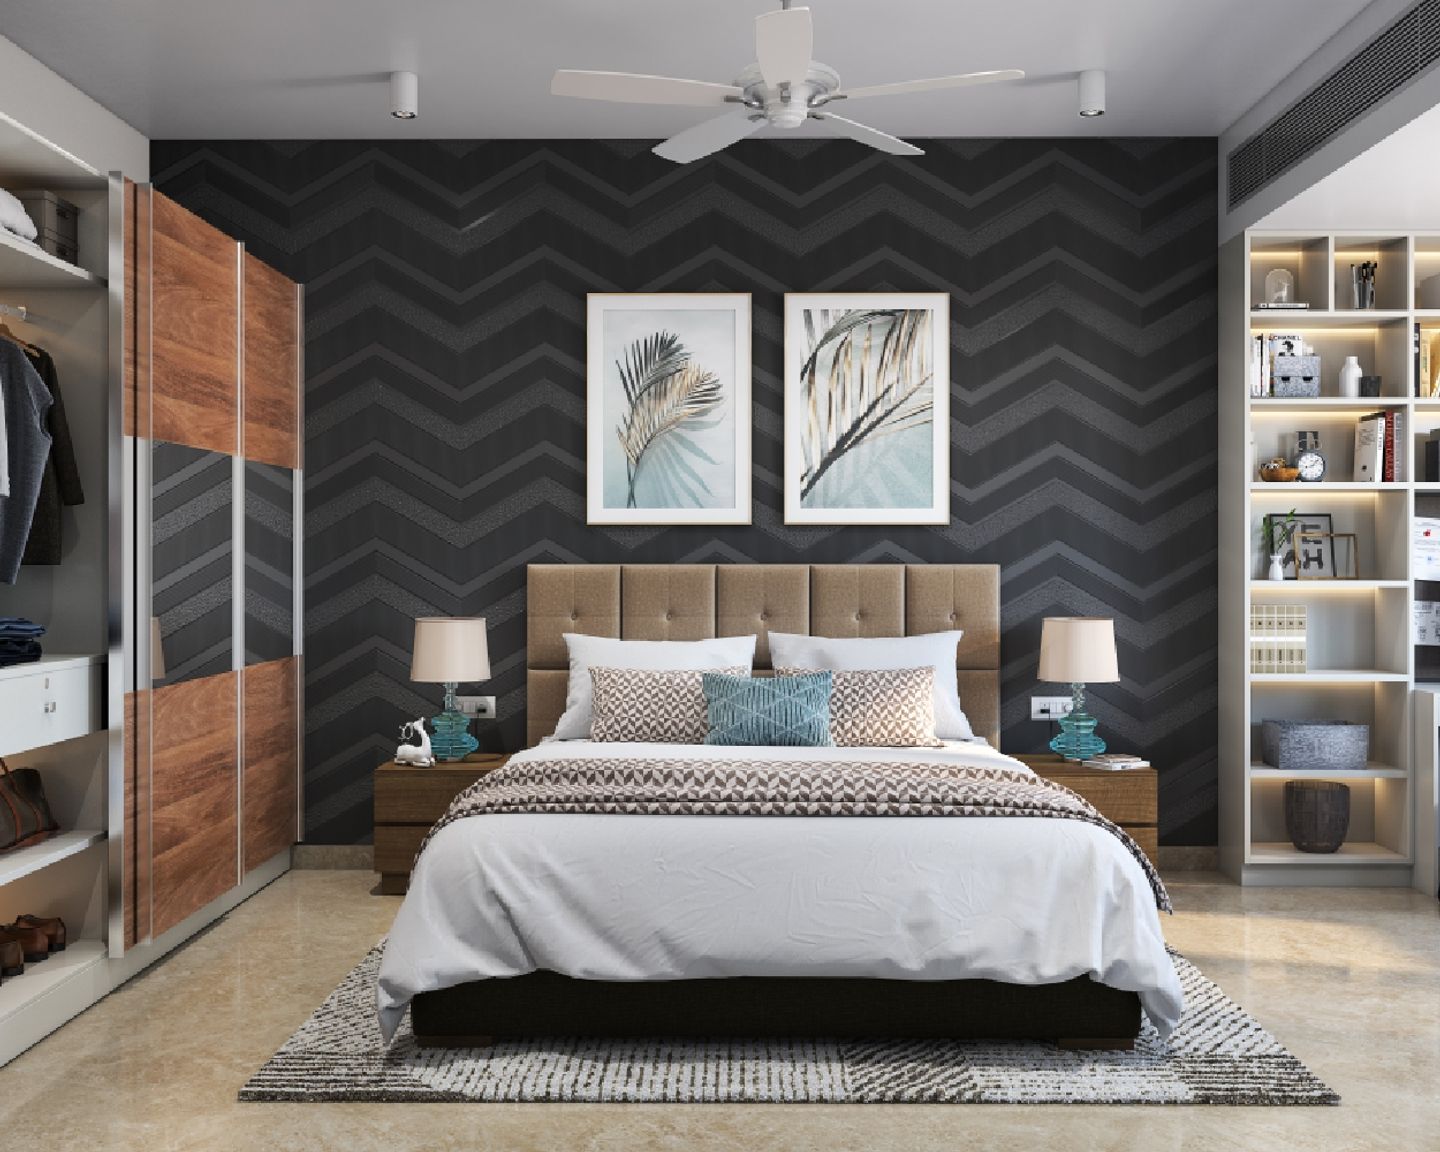 Master Bedroom Design With Chevron Black And Grey Wallpaper, Beige Queen-Size Bed, Wooden Sliding Wardrobe And White Open Storage Unit - Livspace